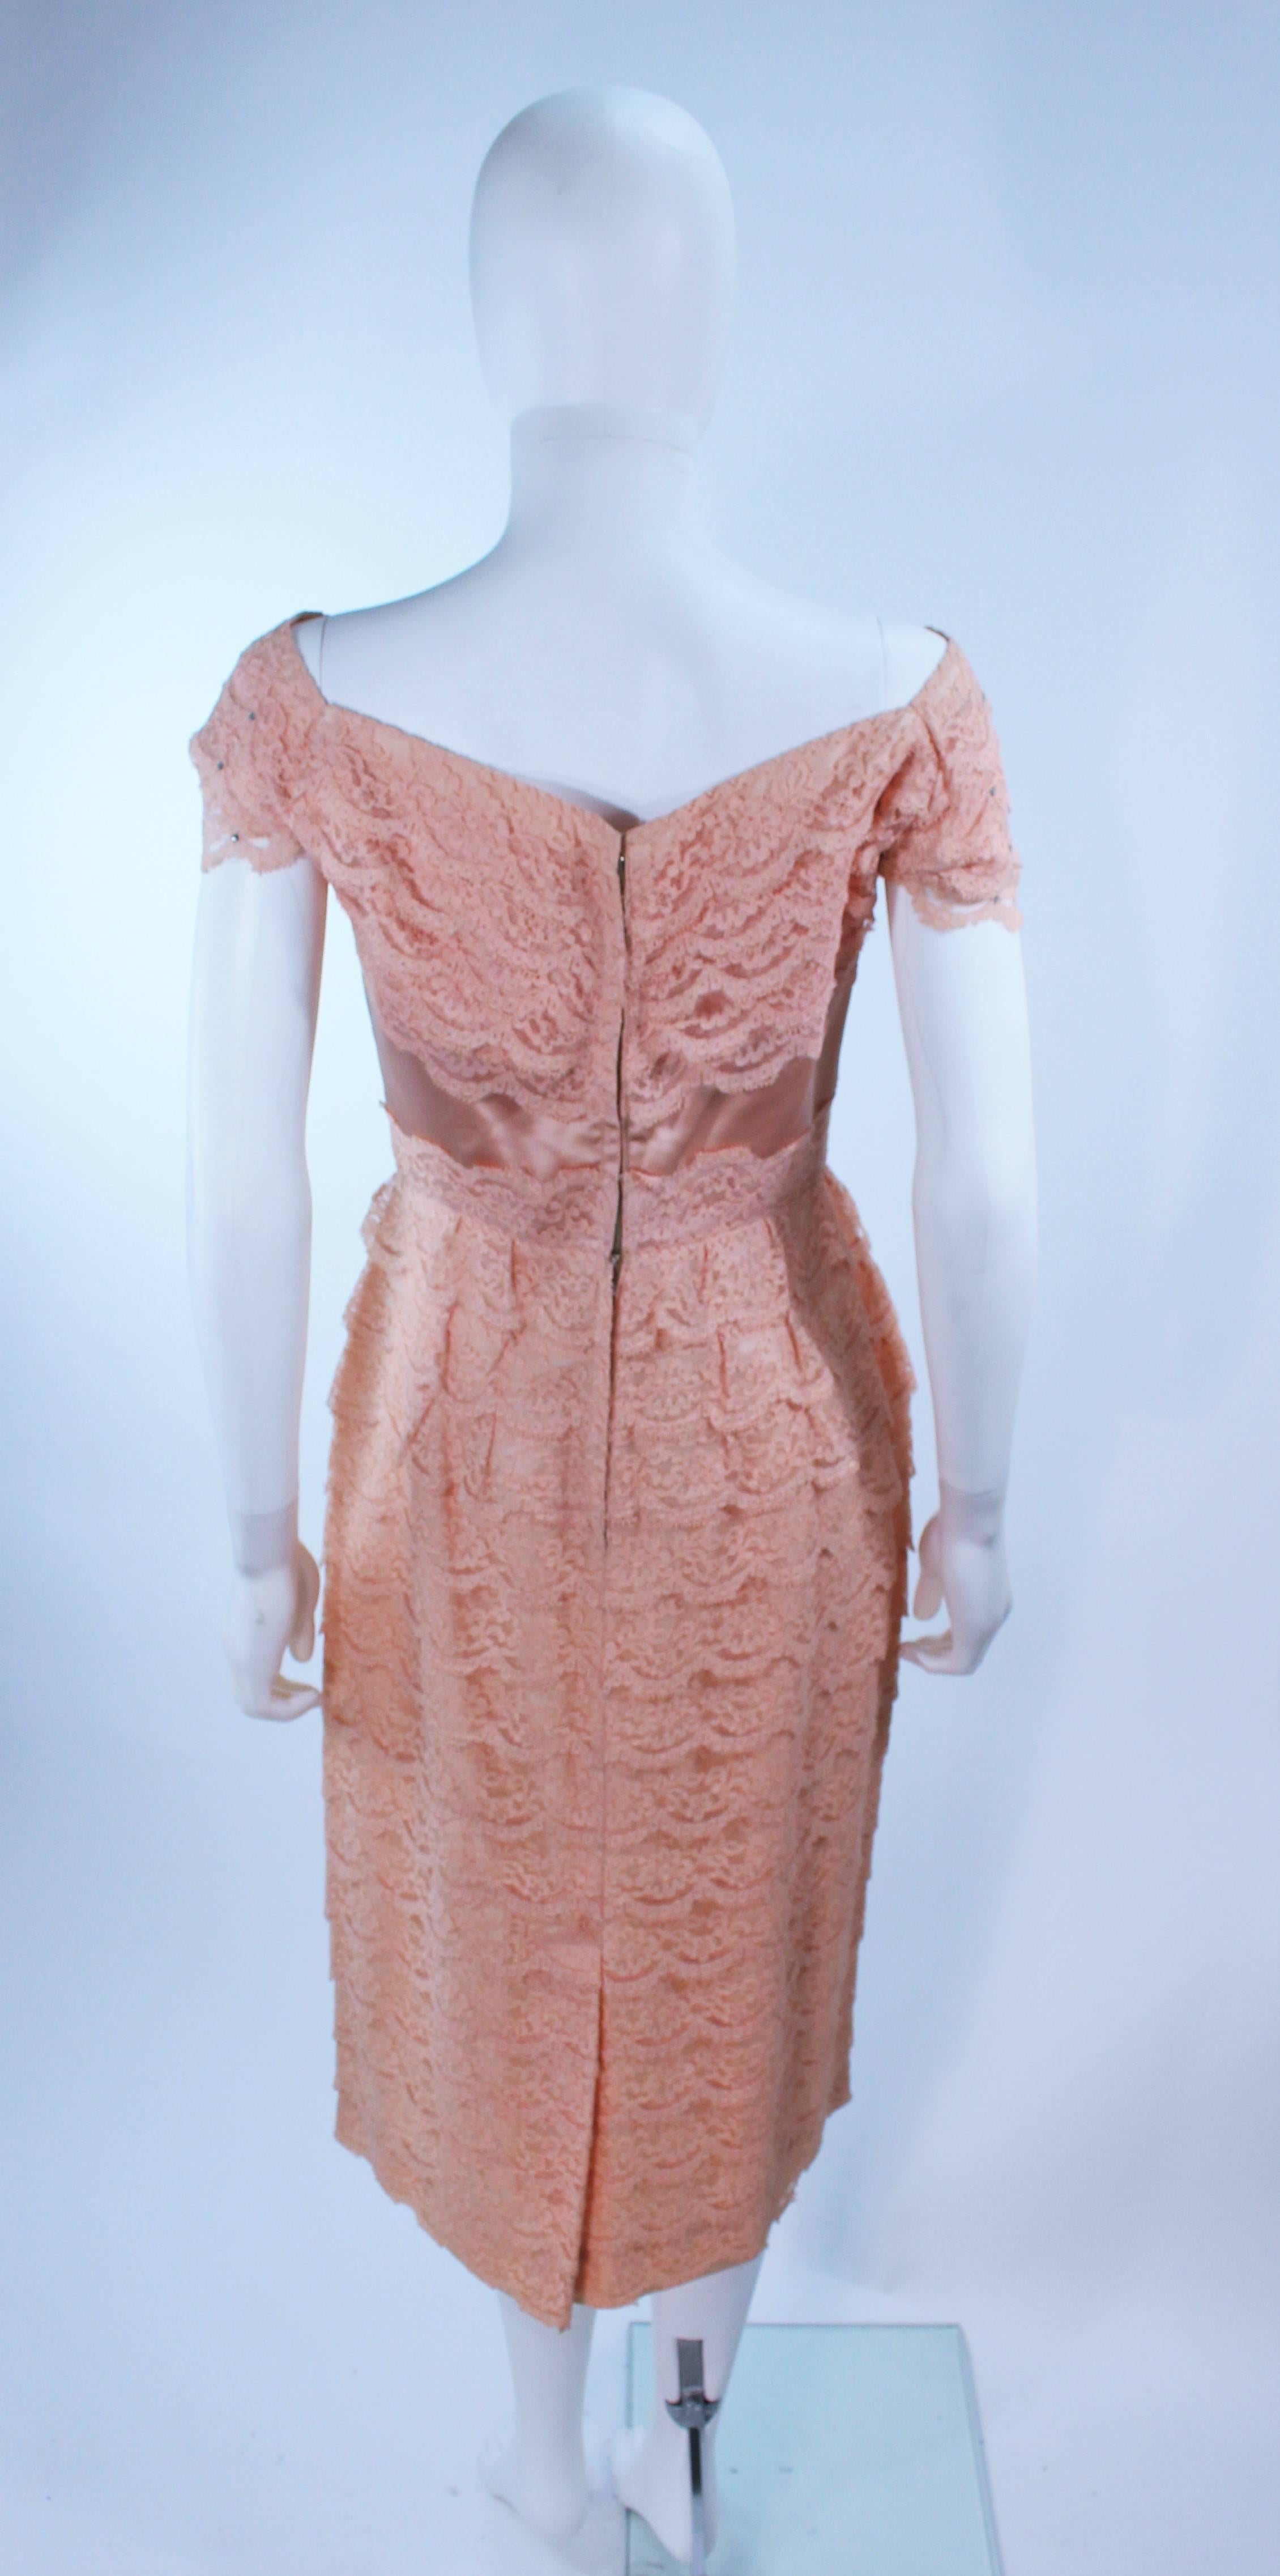 Women's 1950's Tiered Blush Lace Cocktail Dress with Rhinestone Applique Size 6 8 For Sale